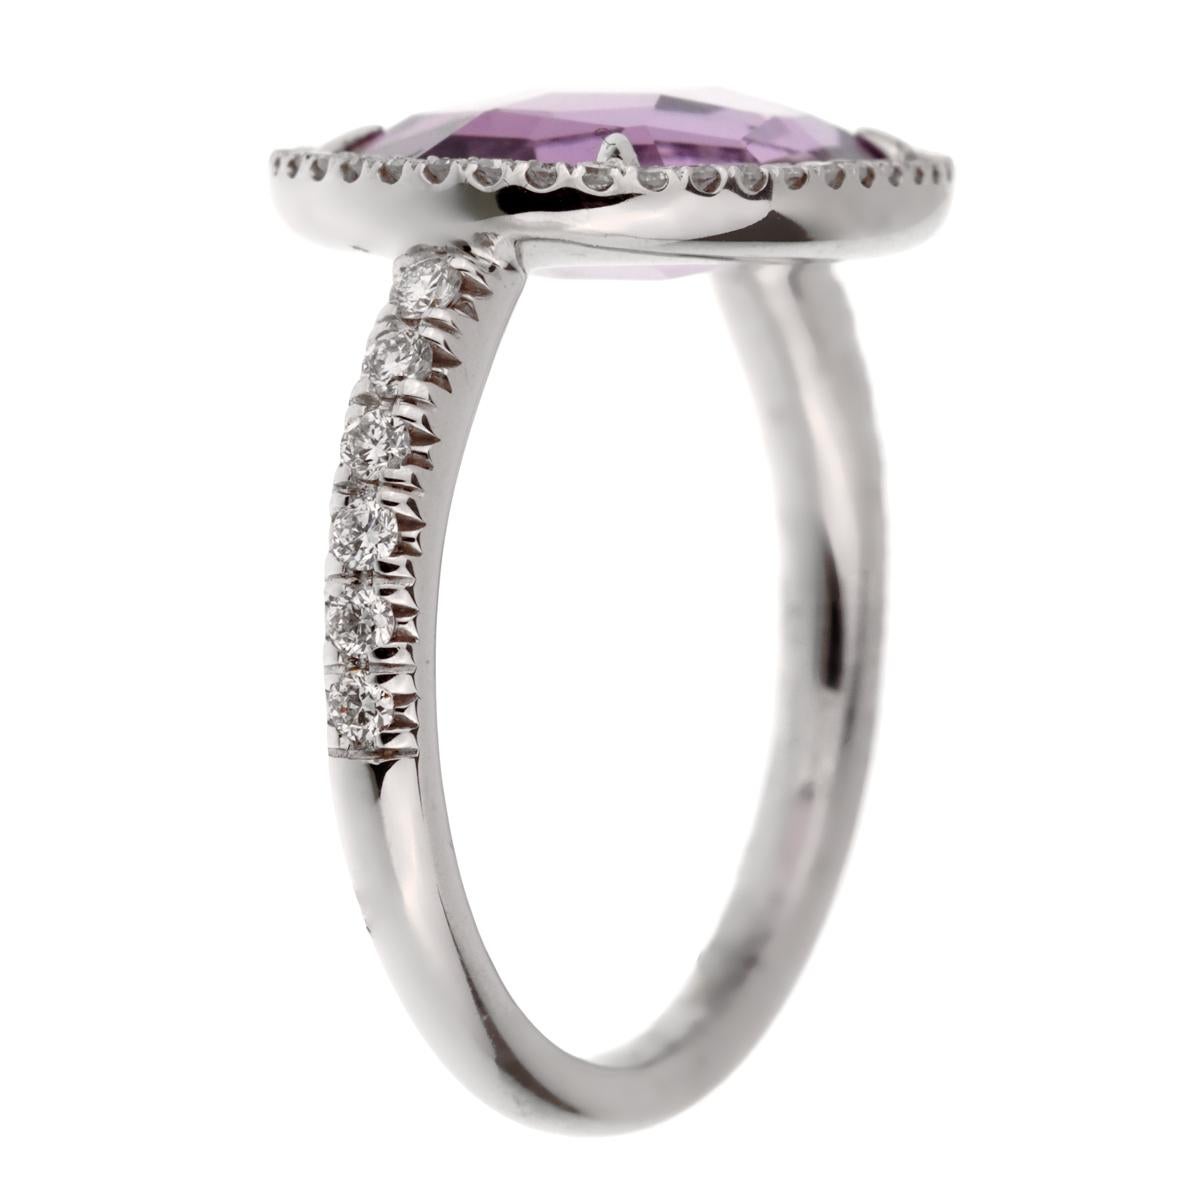 A chic Mimi Milano ring showcasing a 3.80ct amethyst encased with round brilliant cut diamonds in 18k white gold. The ring measures a size 7 and can be resized.

Sku: 2499